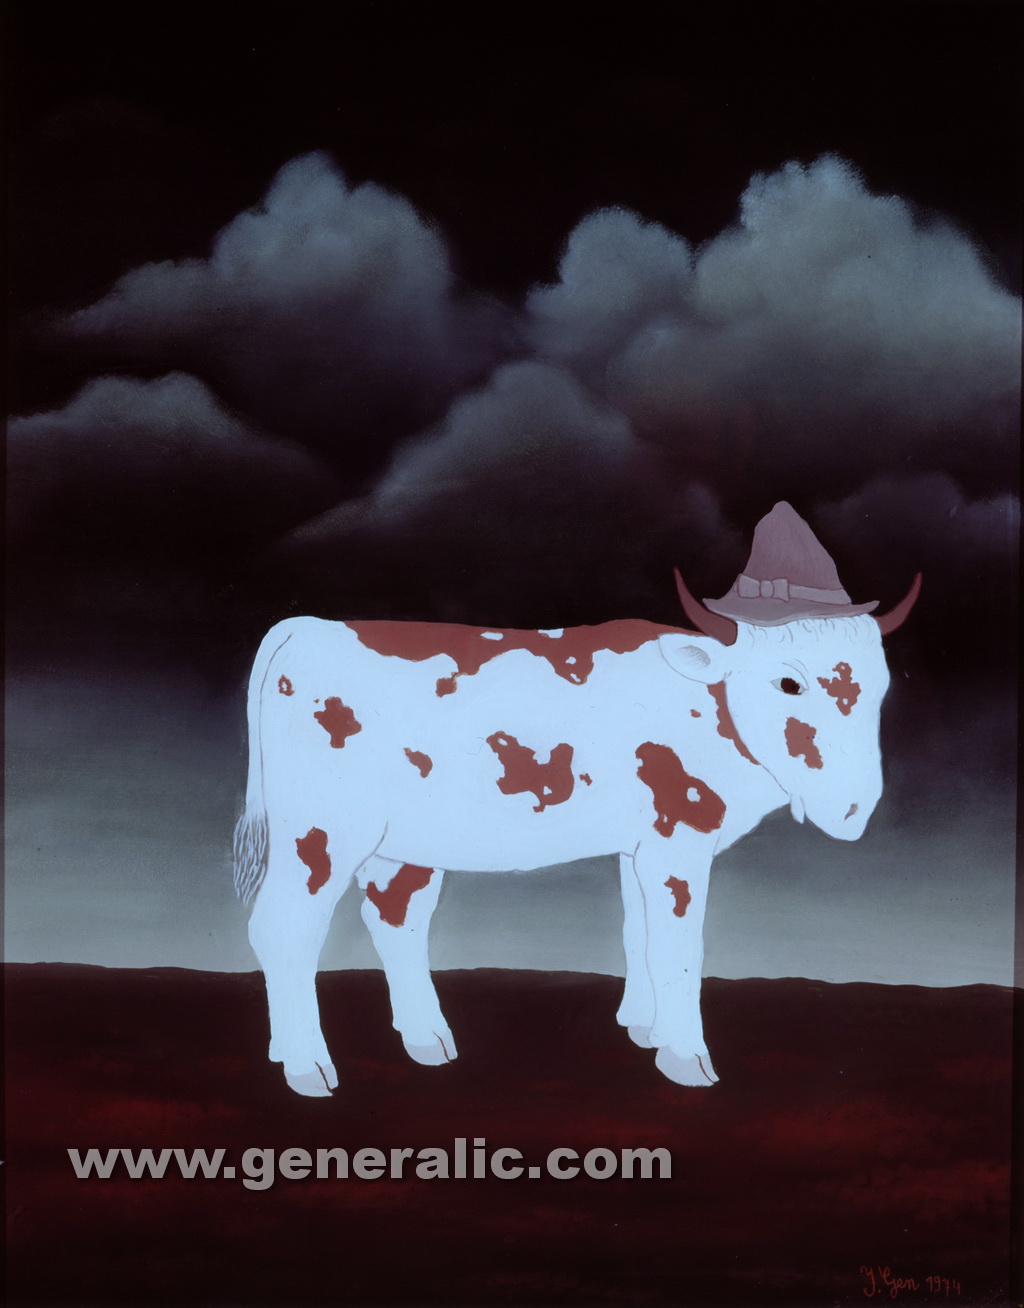 Ivan Generalic, 1975, Calf with a hat, oil on glass